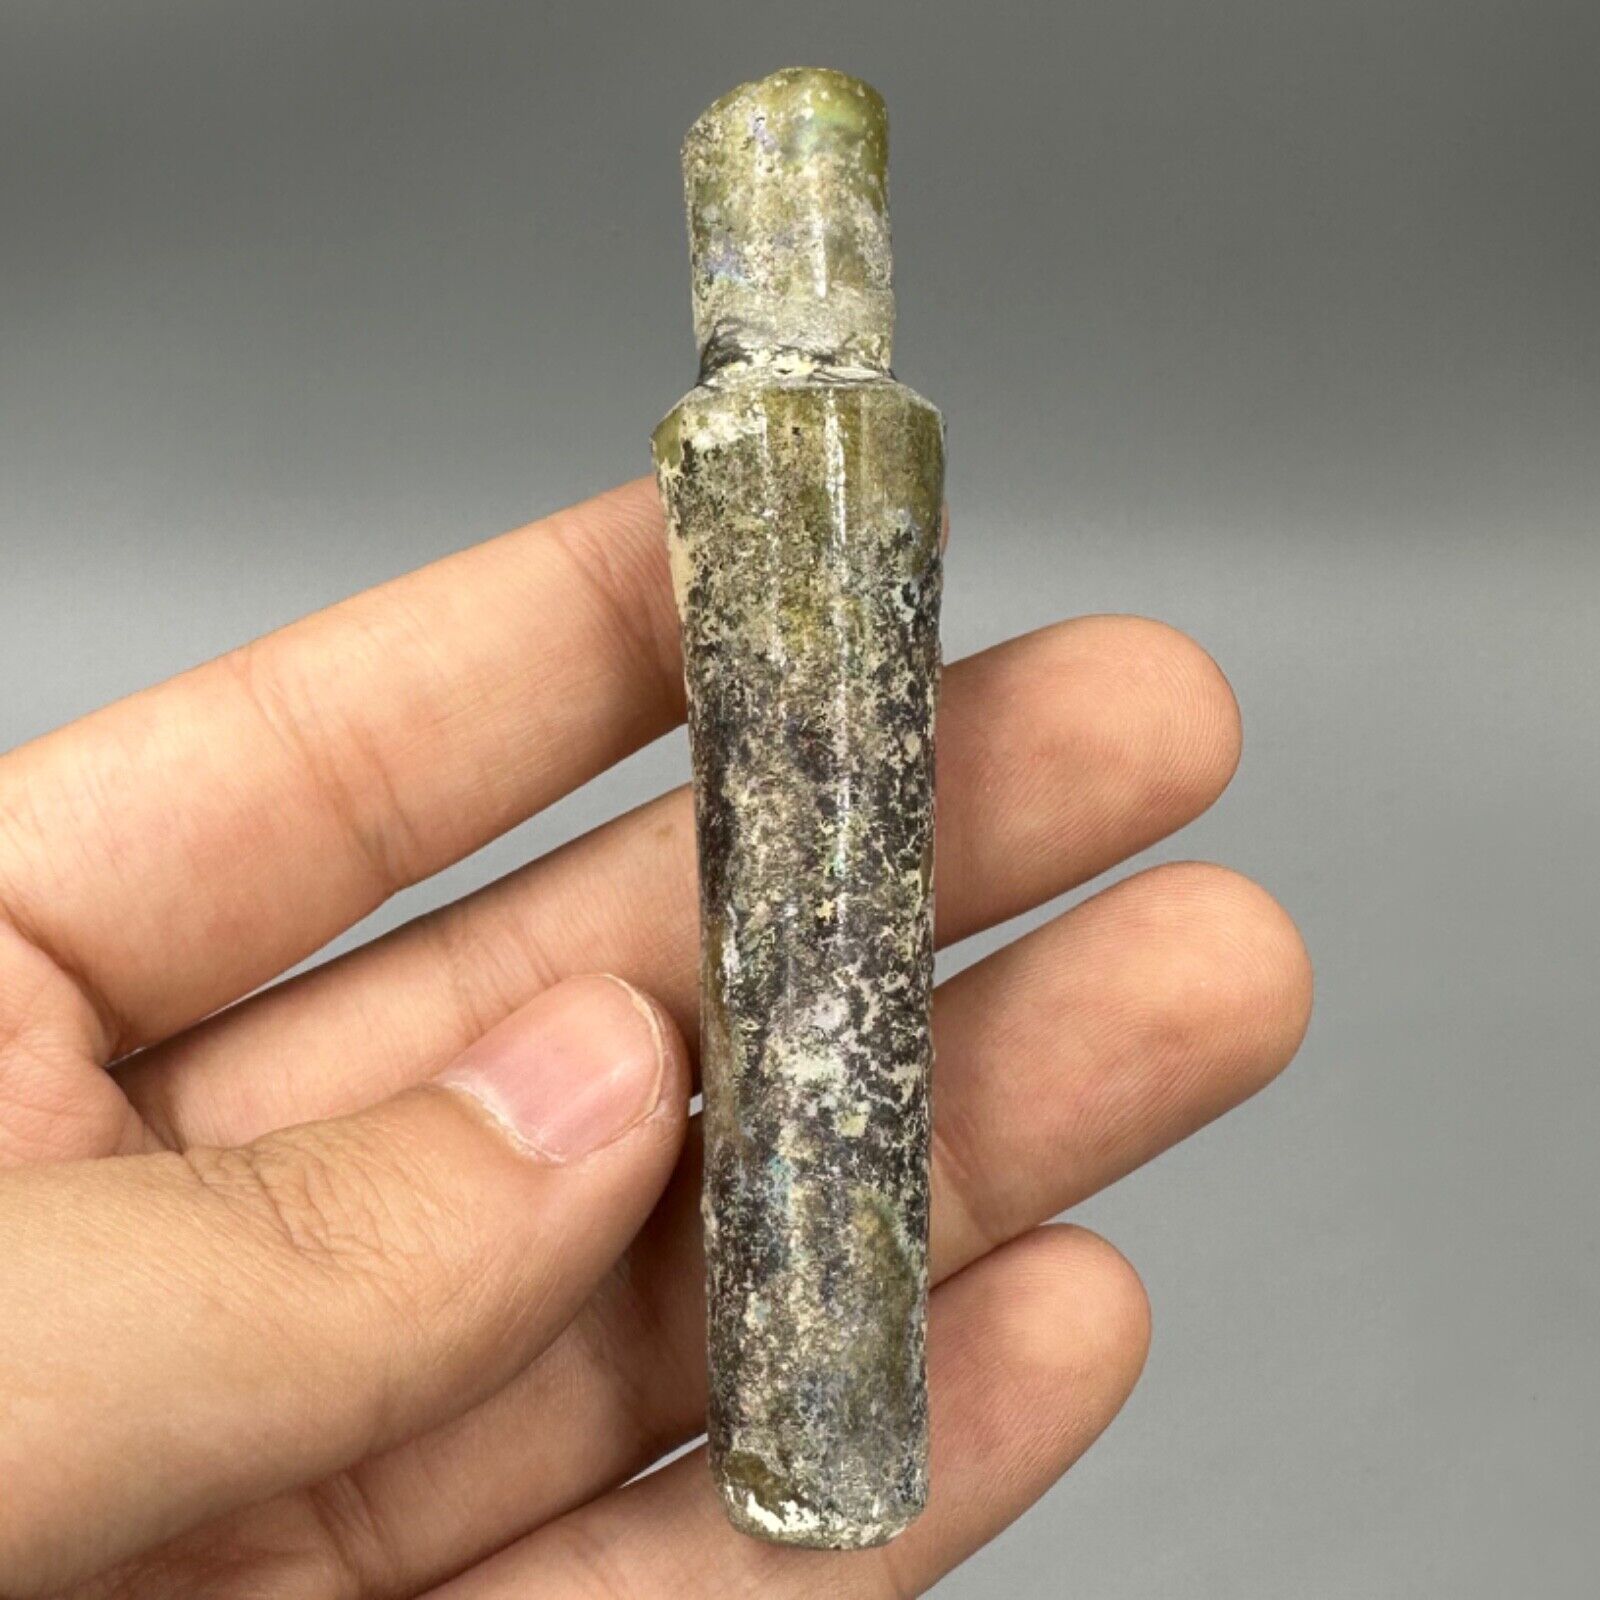 An Intact Genuine Ancient Roman Glass Long Tube Bottle